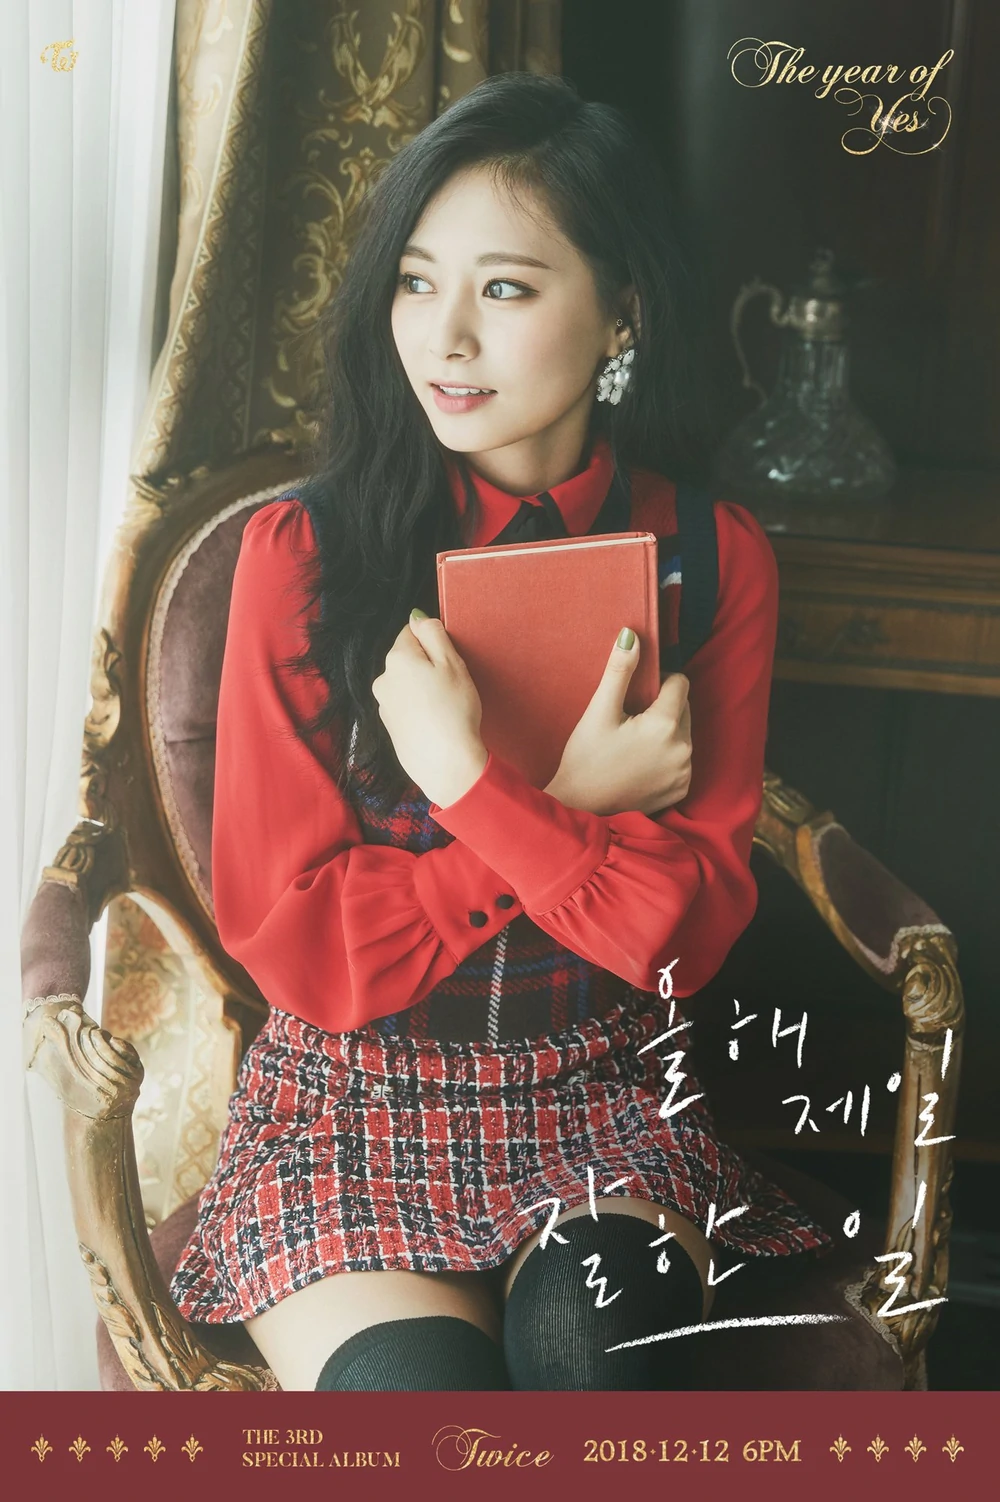 Twice Year Of Yes Tzuyu Concept Teaser Picture Image Photo Kpop K-Concept 1